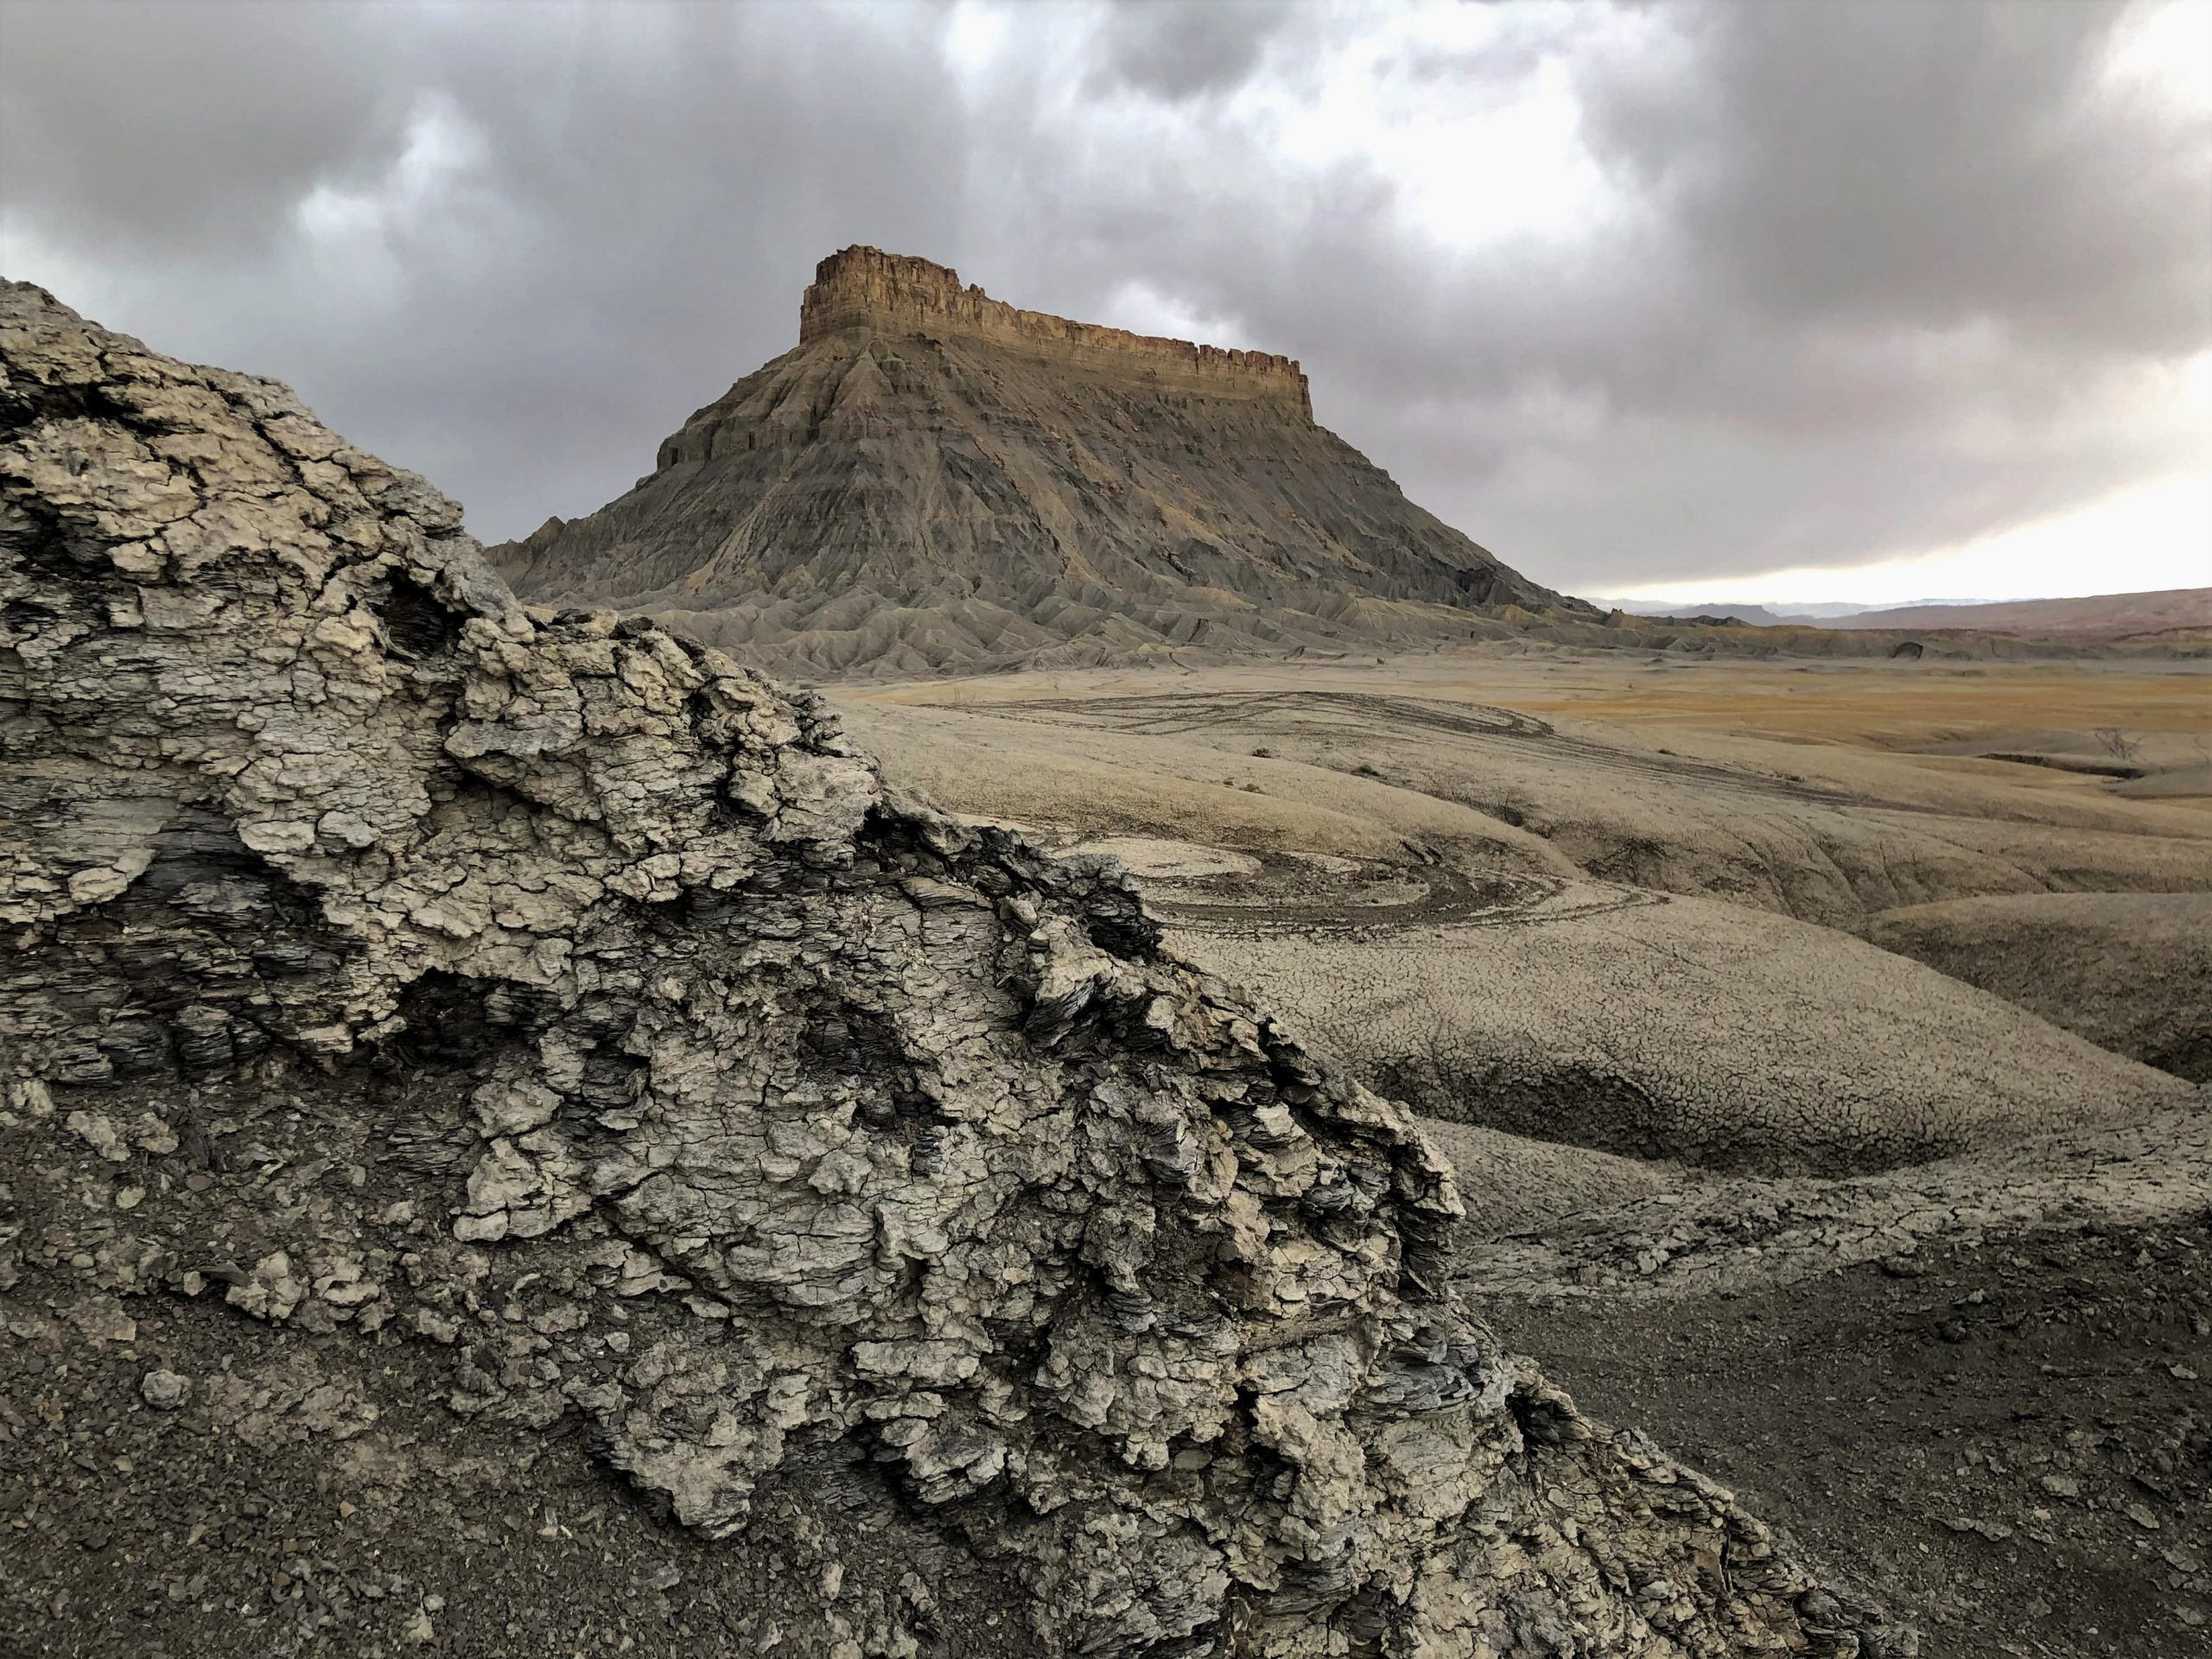 a shot of factory butte in utah with cloudy skies